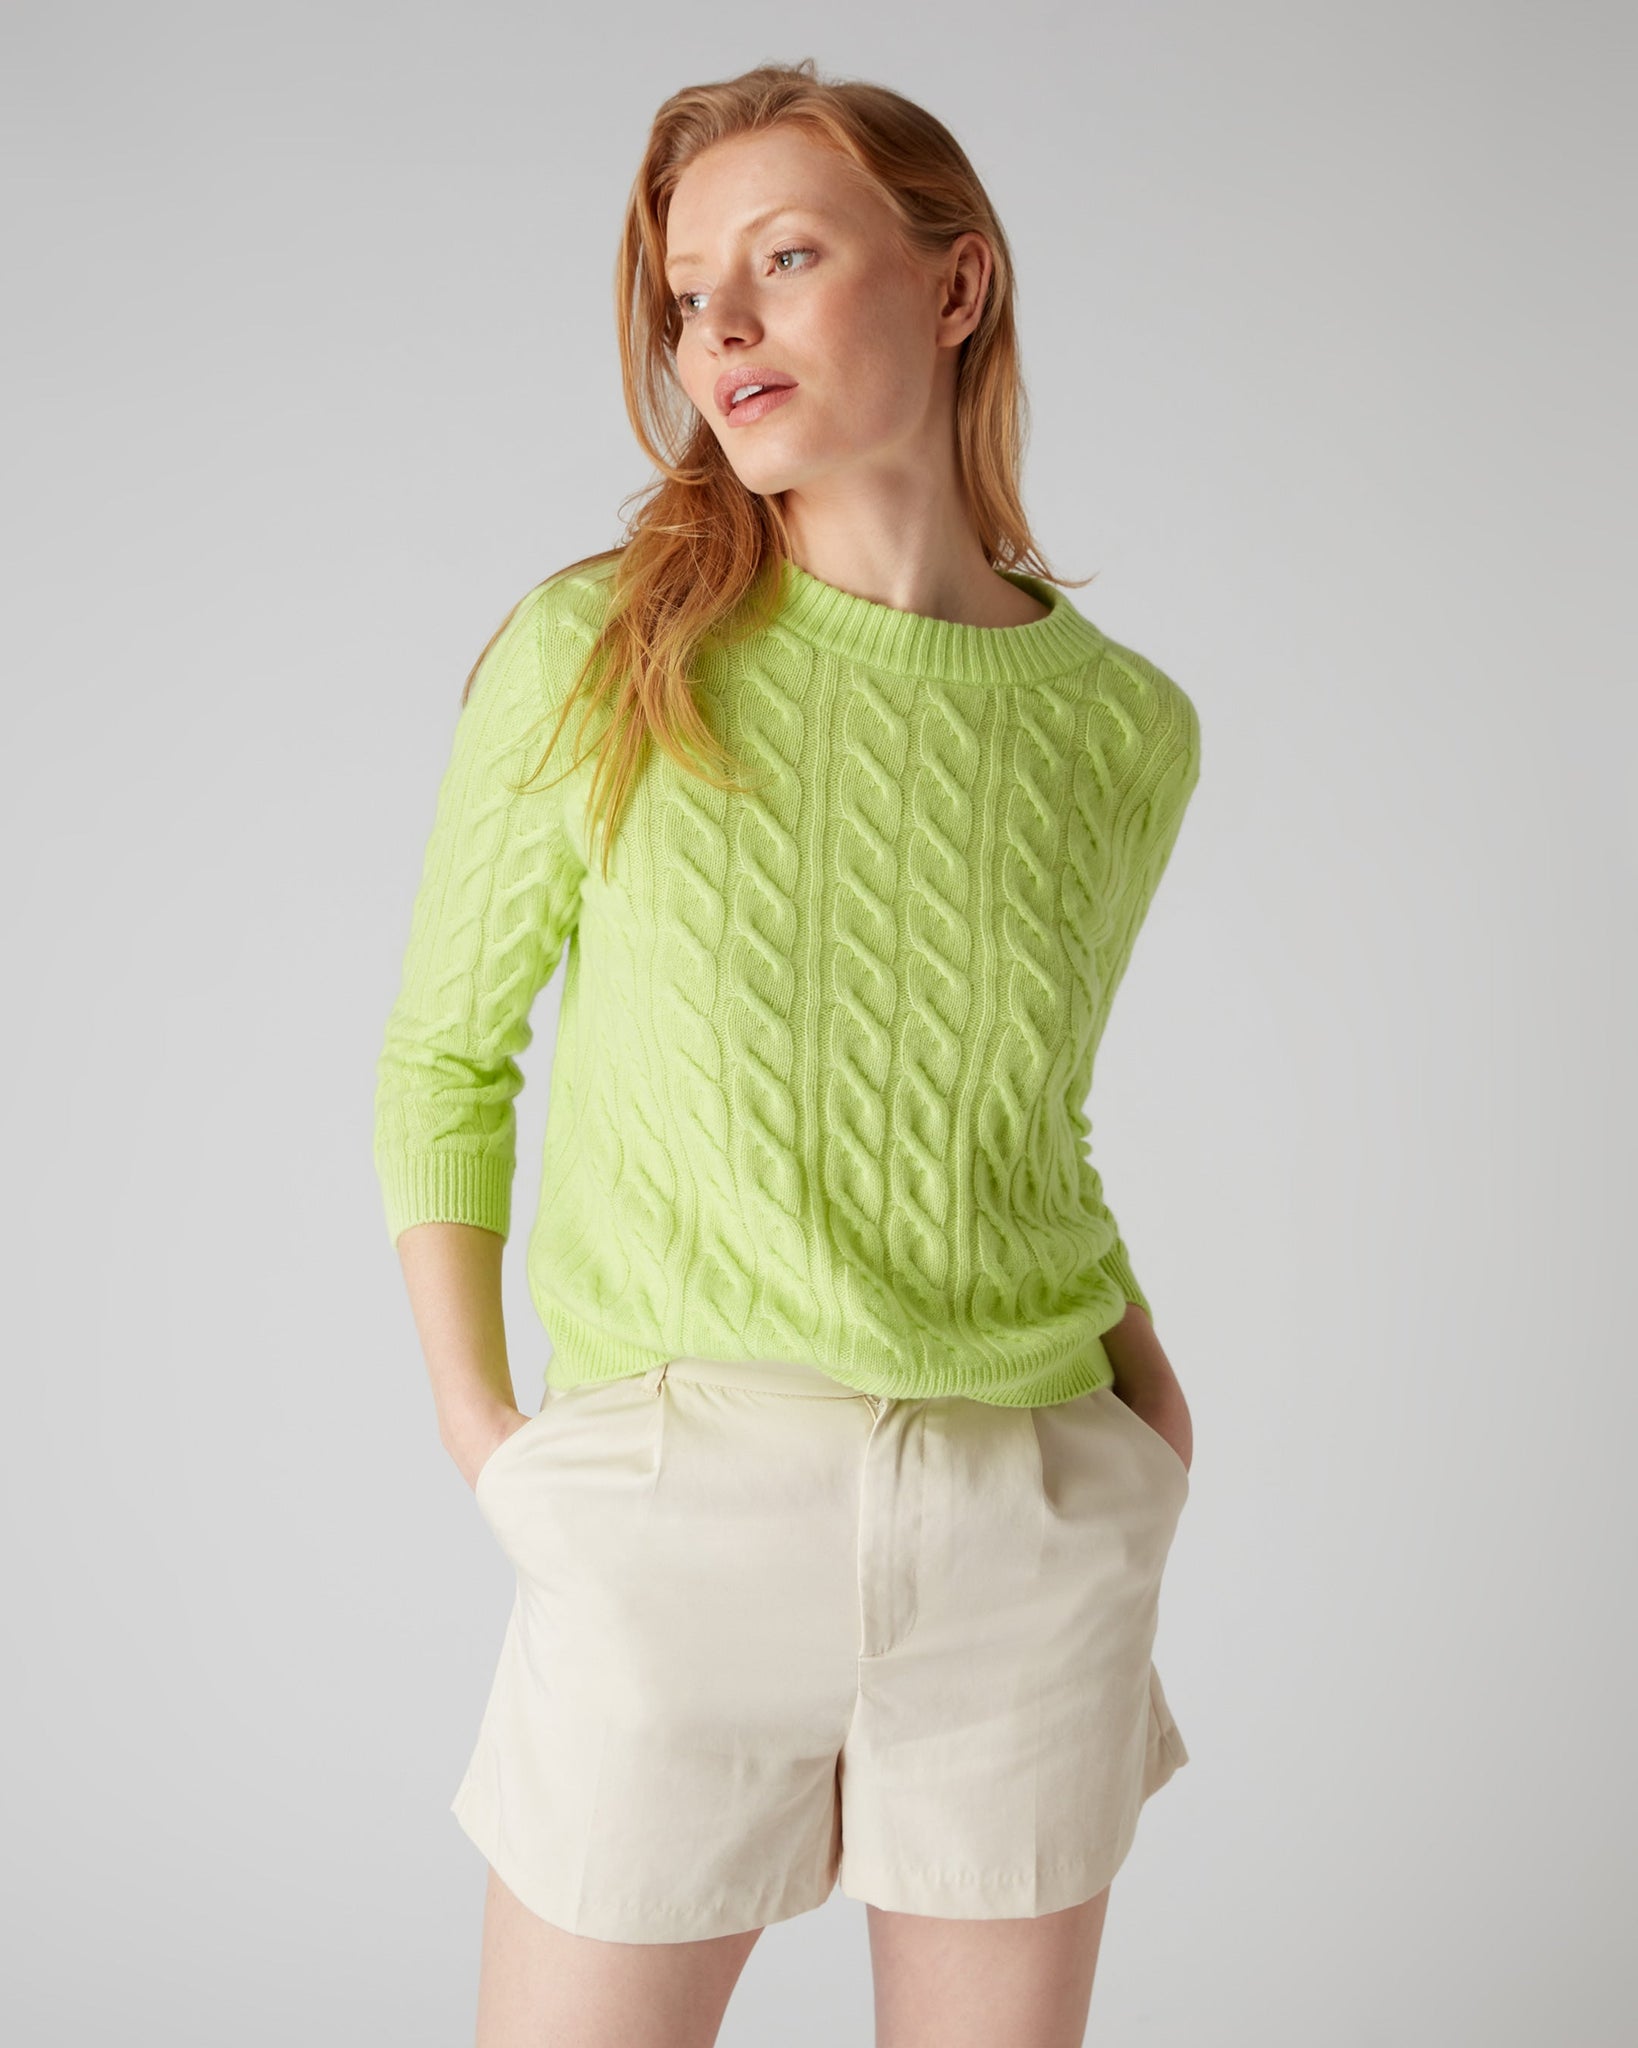 Women's Round Neck Cable Cashmere Jumper Key Lime Green – N.Peal